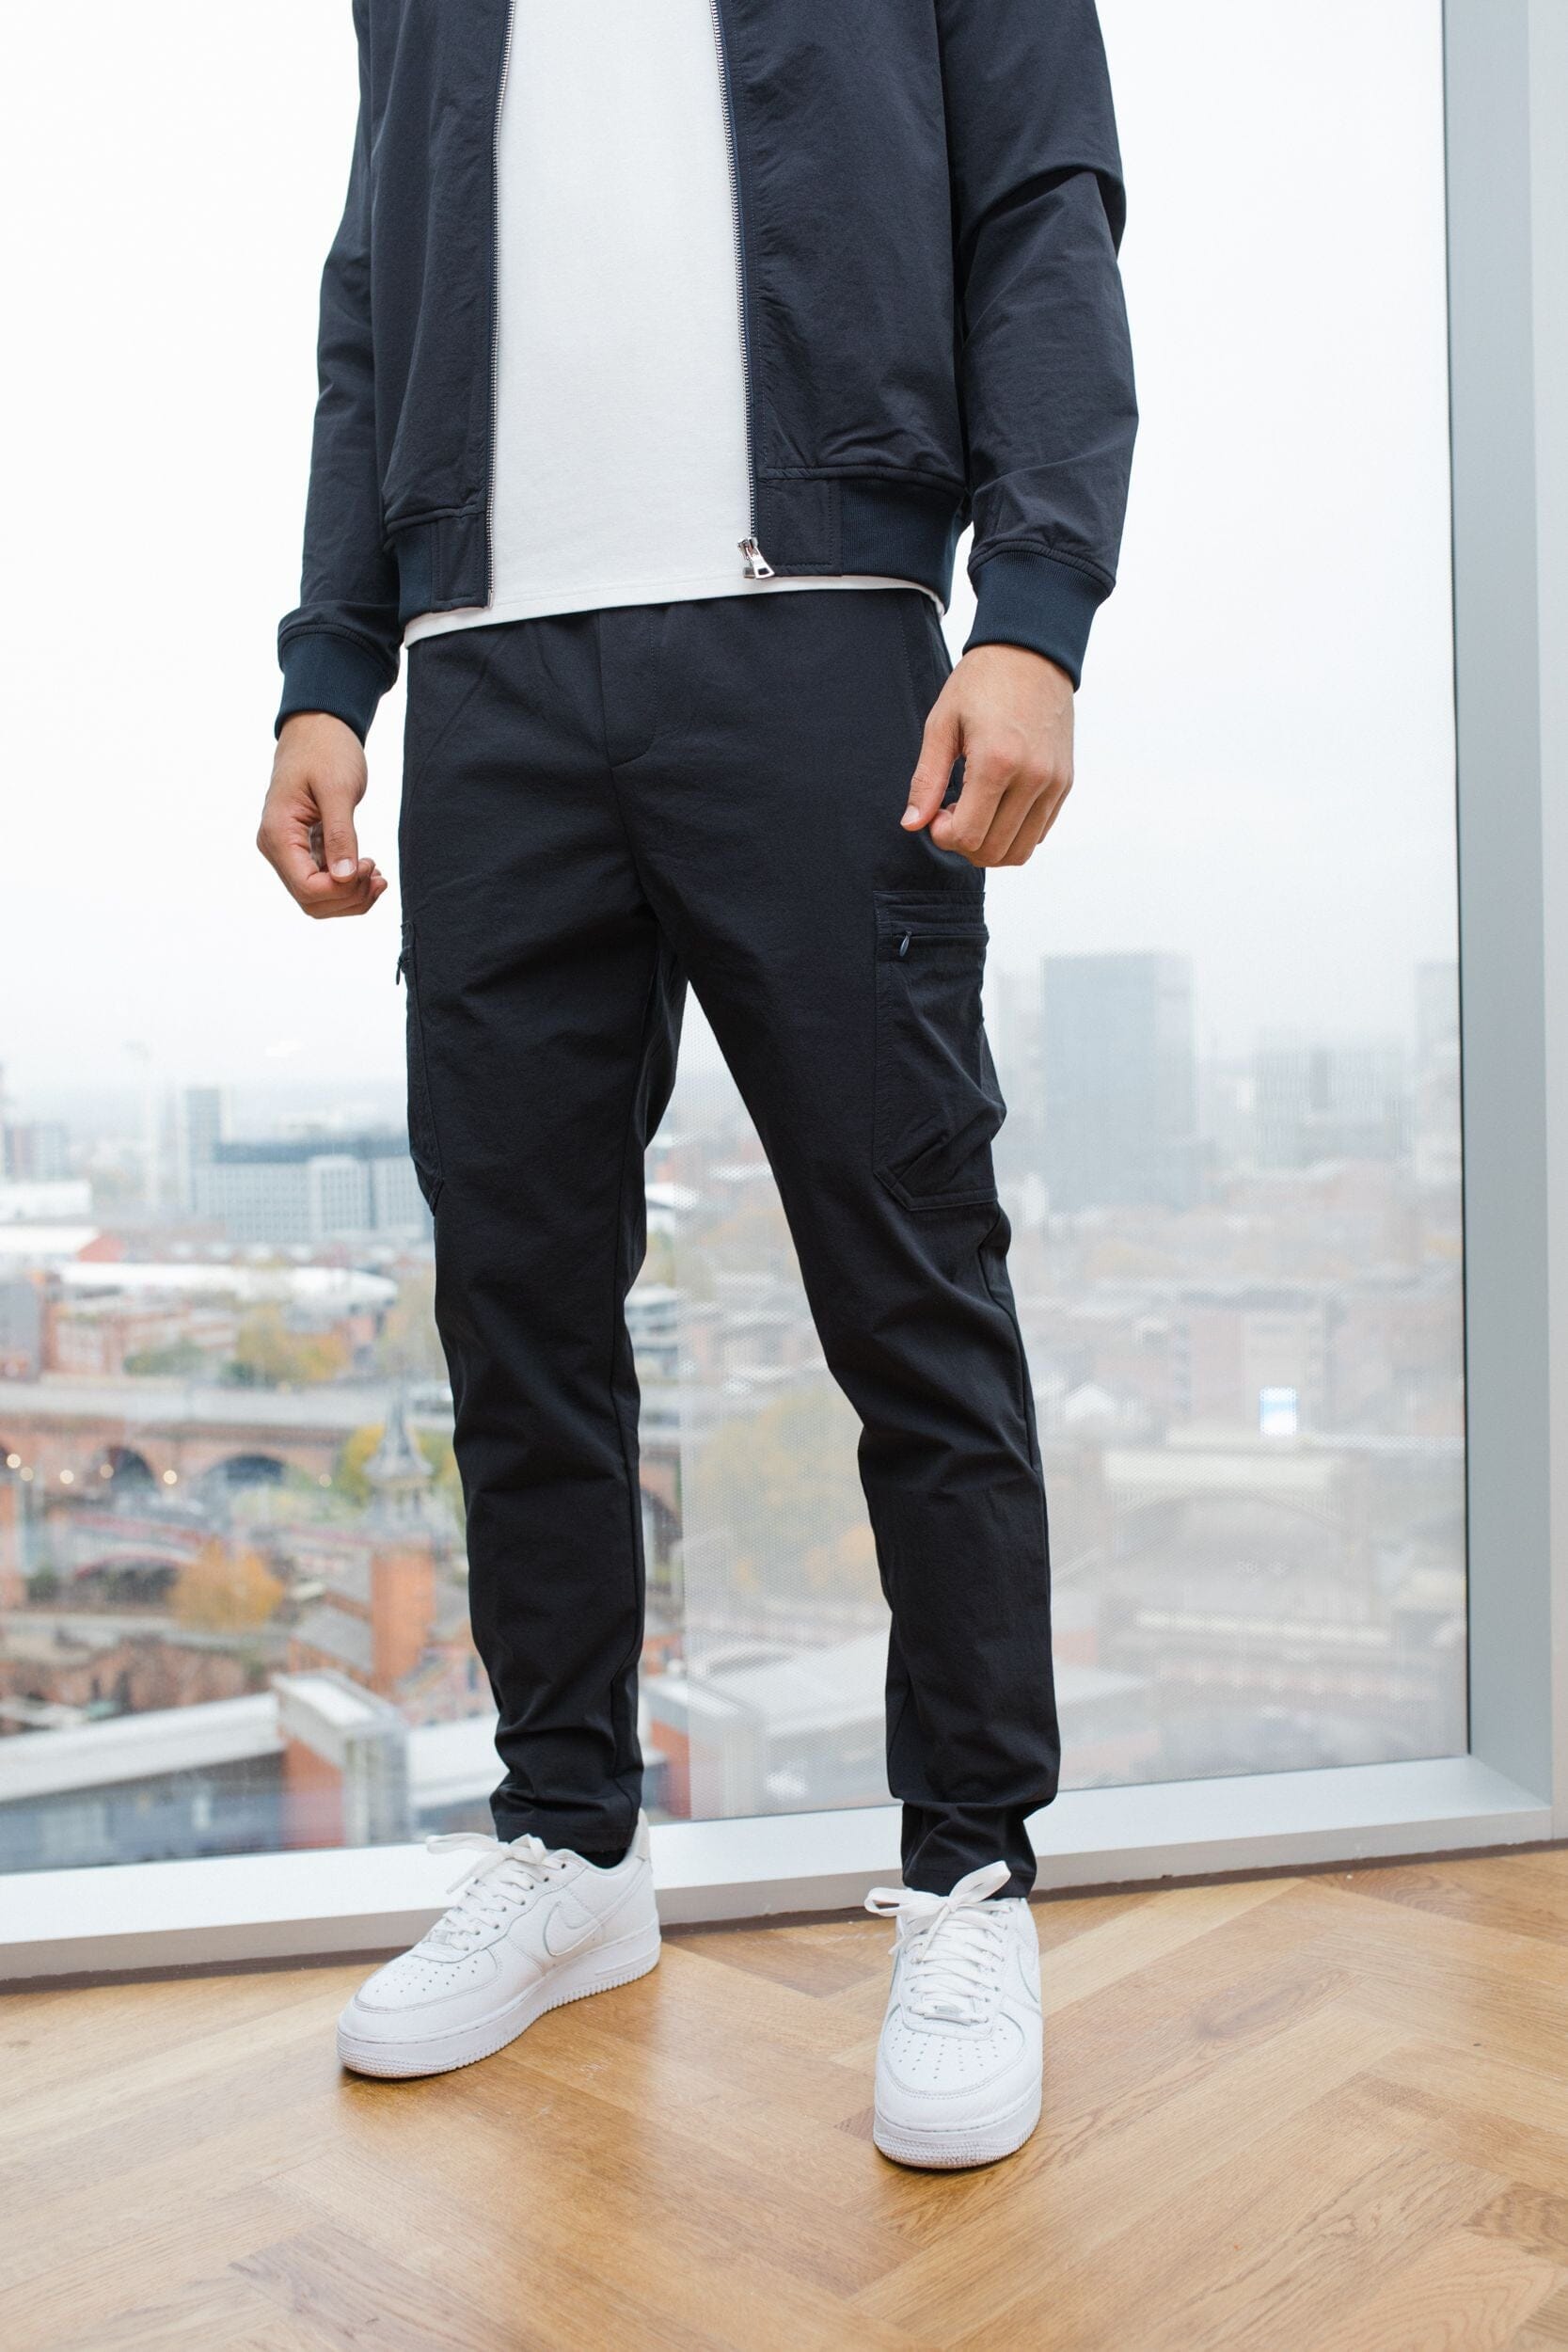 5 trouser styles every man needs in their wardrobe 